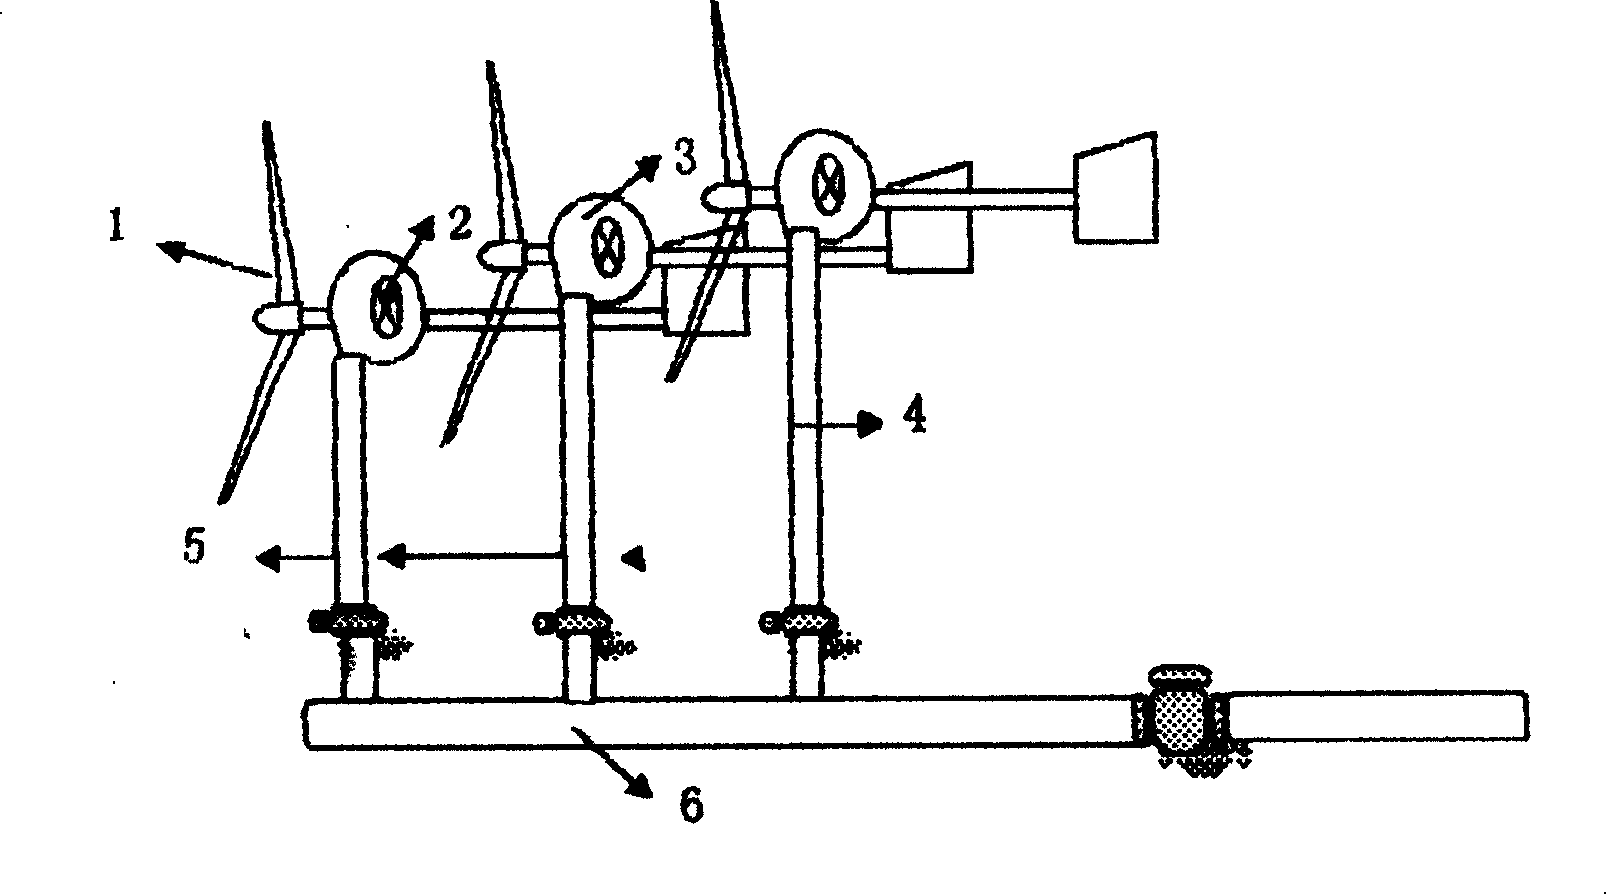 Method for preparing compressed air by pneumatic air compressor